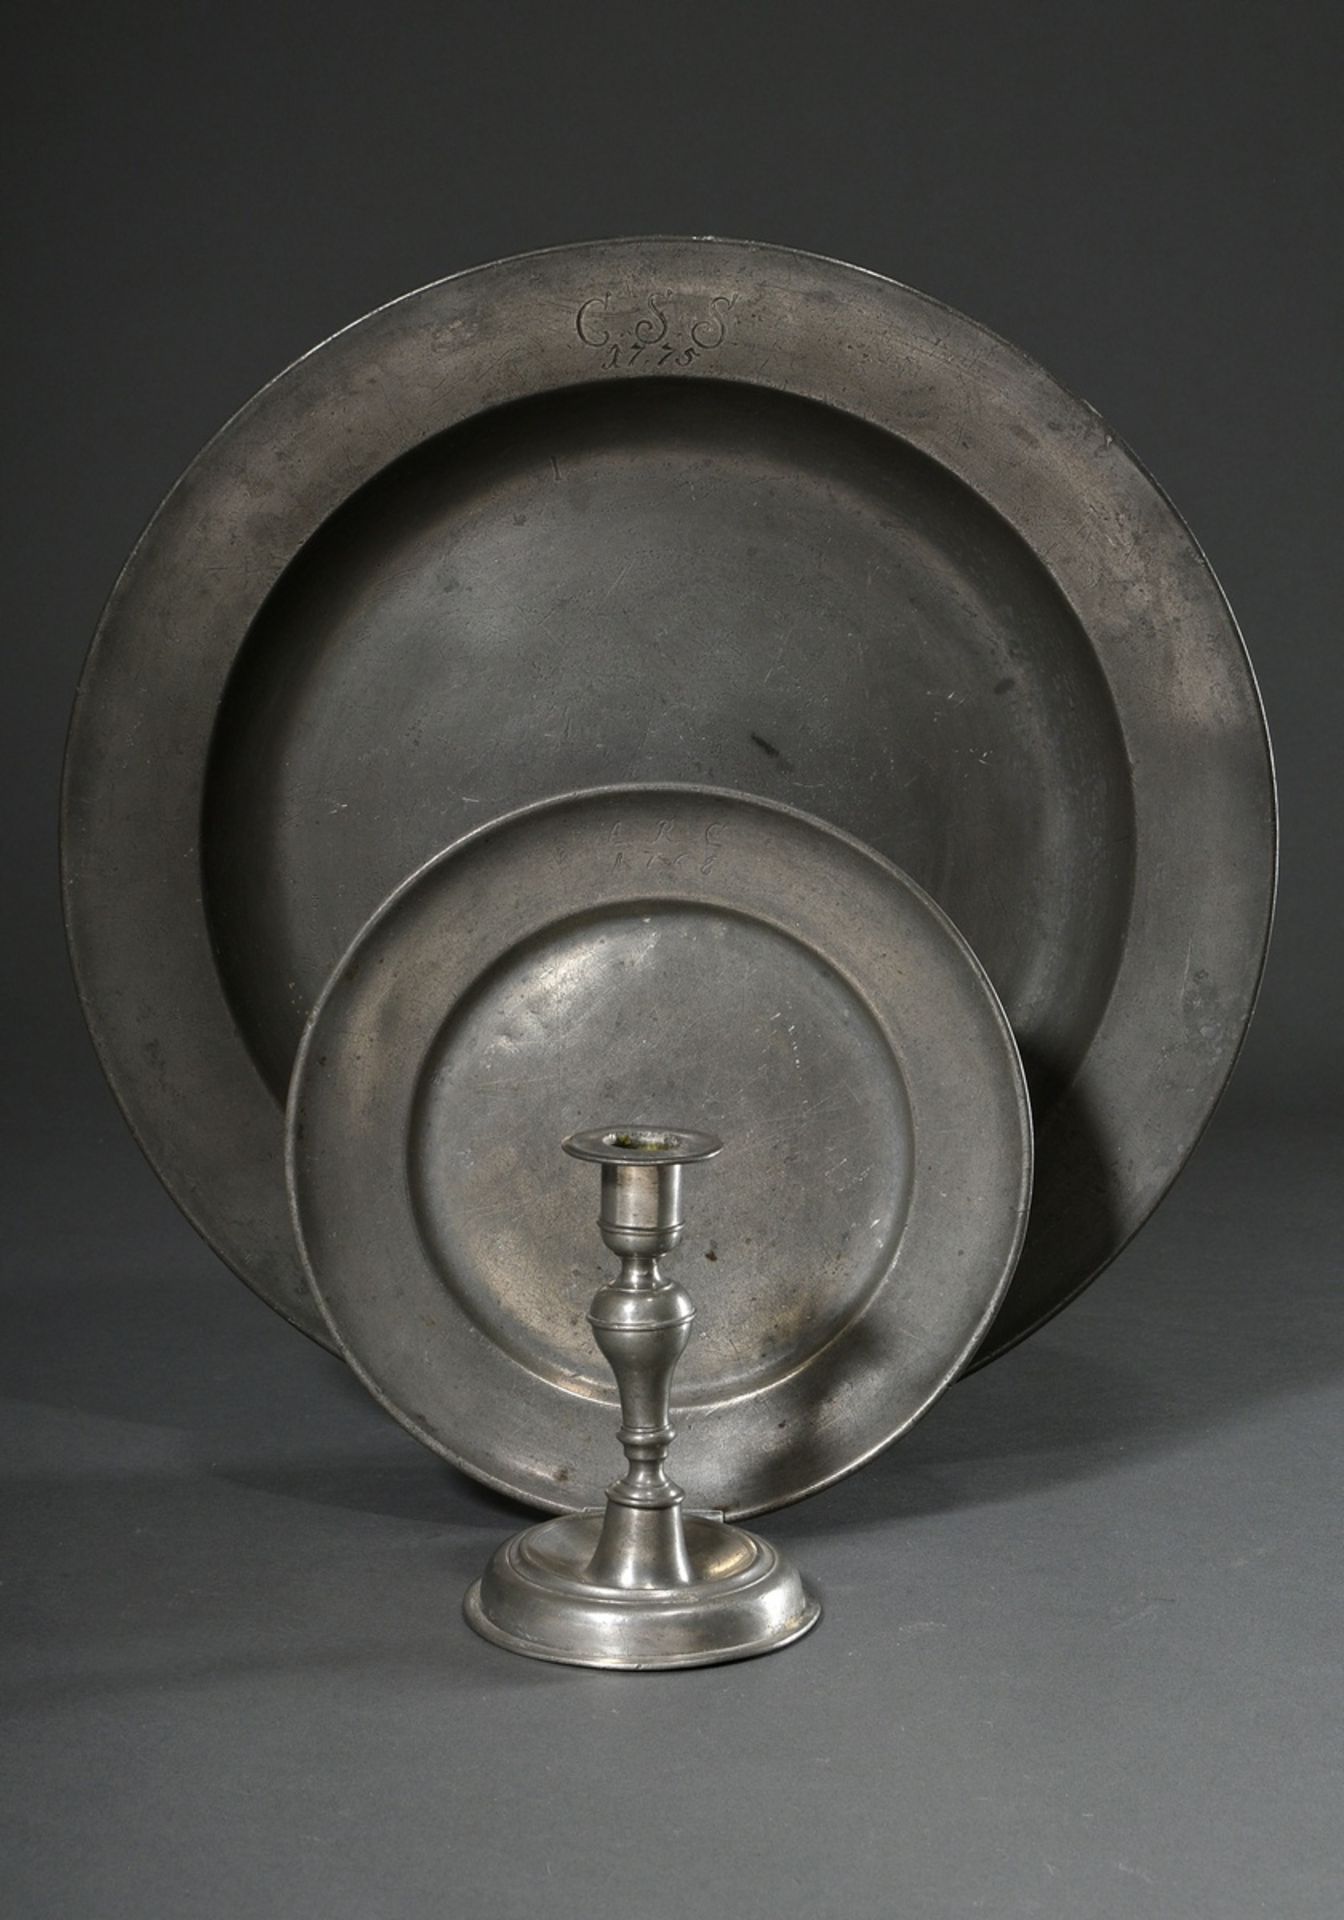 3 Various pieces of pewter, 18th century: large plate with engraved owner's monogram "C.S.S. 1775", - Image 2 of 11